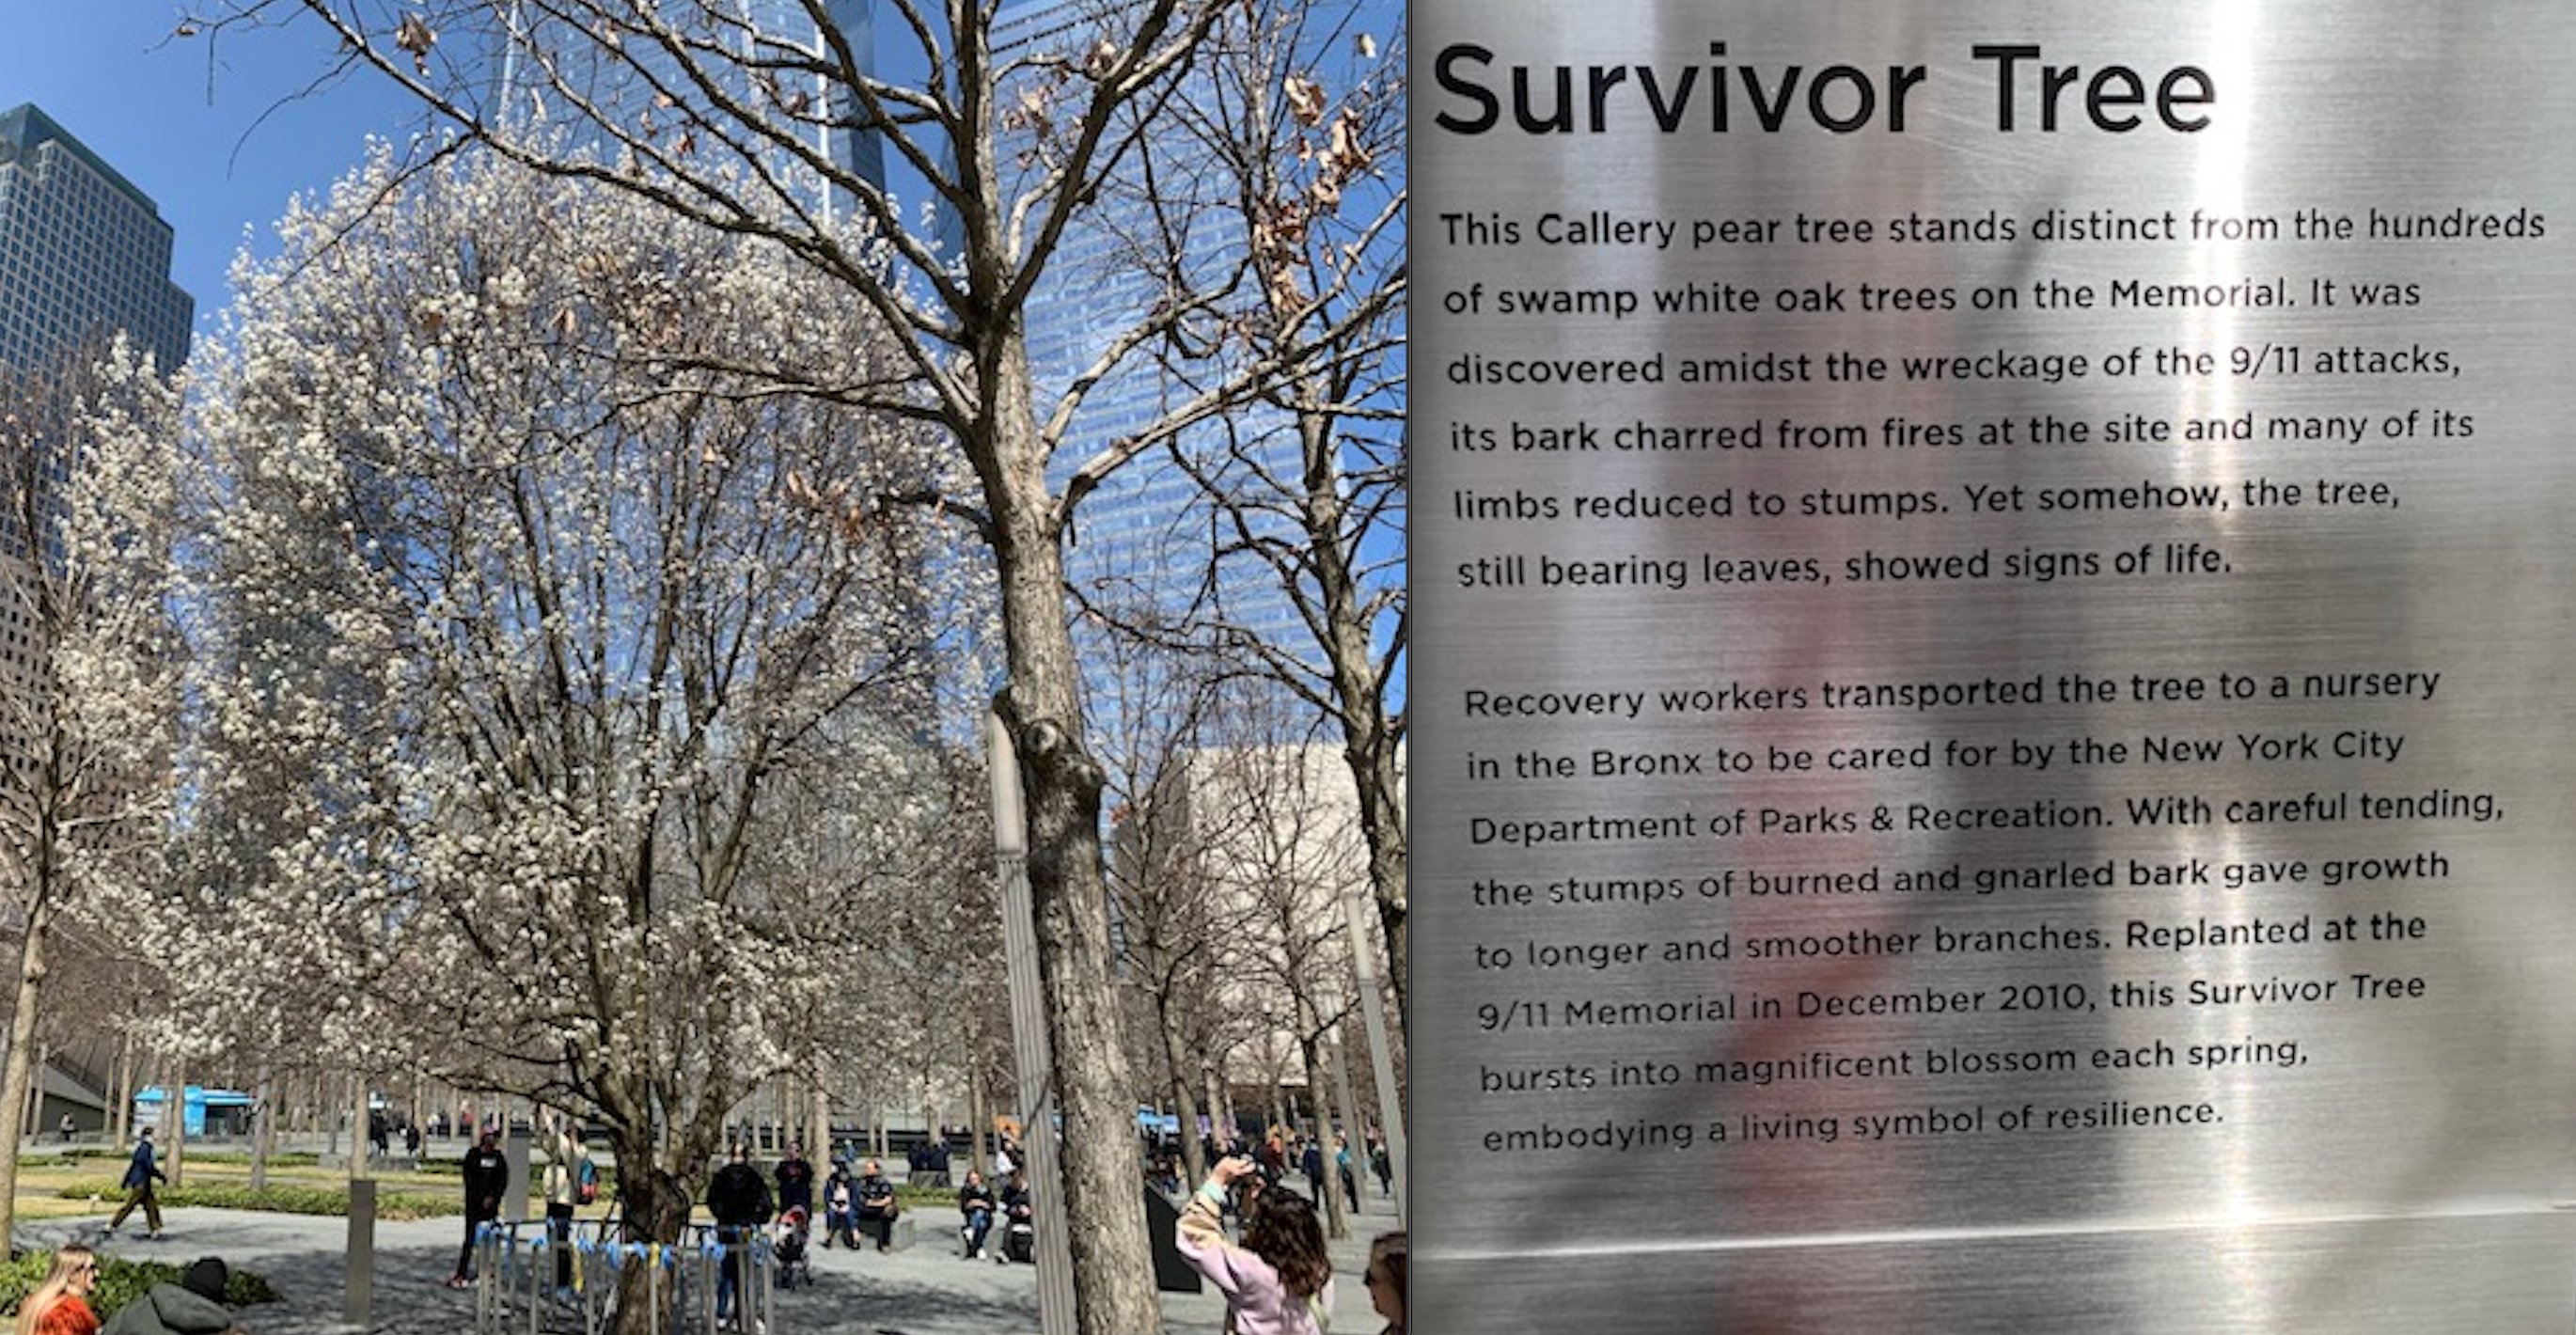 Bruce Sussman on X: The Survivor Tree in all its inspiring spring glory at  the ground zero memorial. I pass it every day on my way to the theater.  Today I had